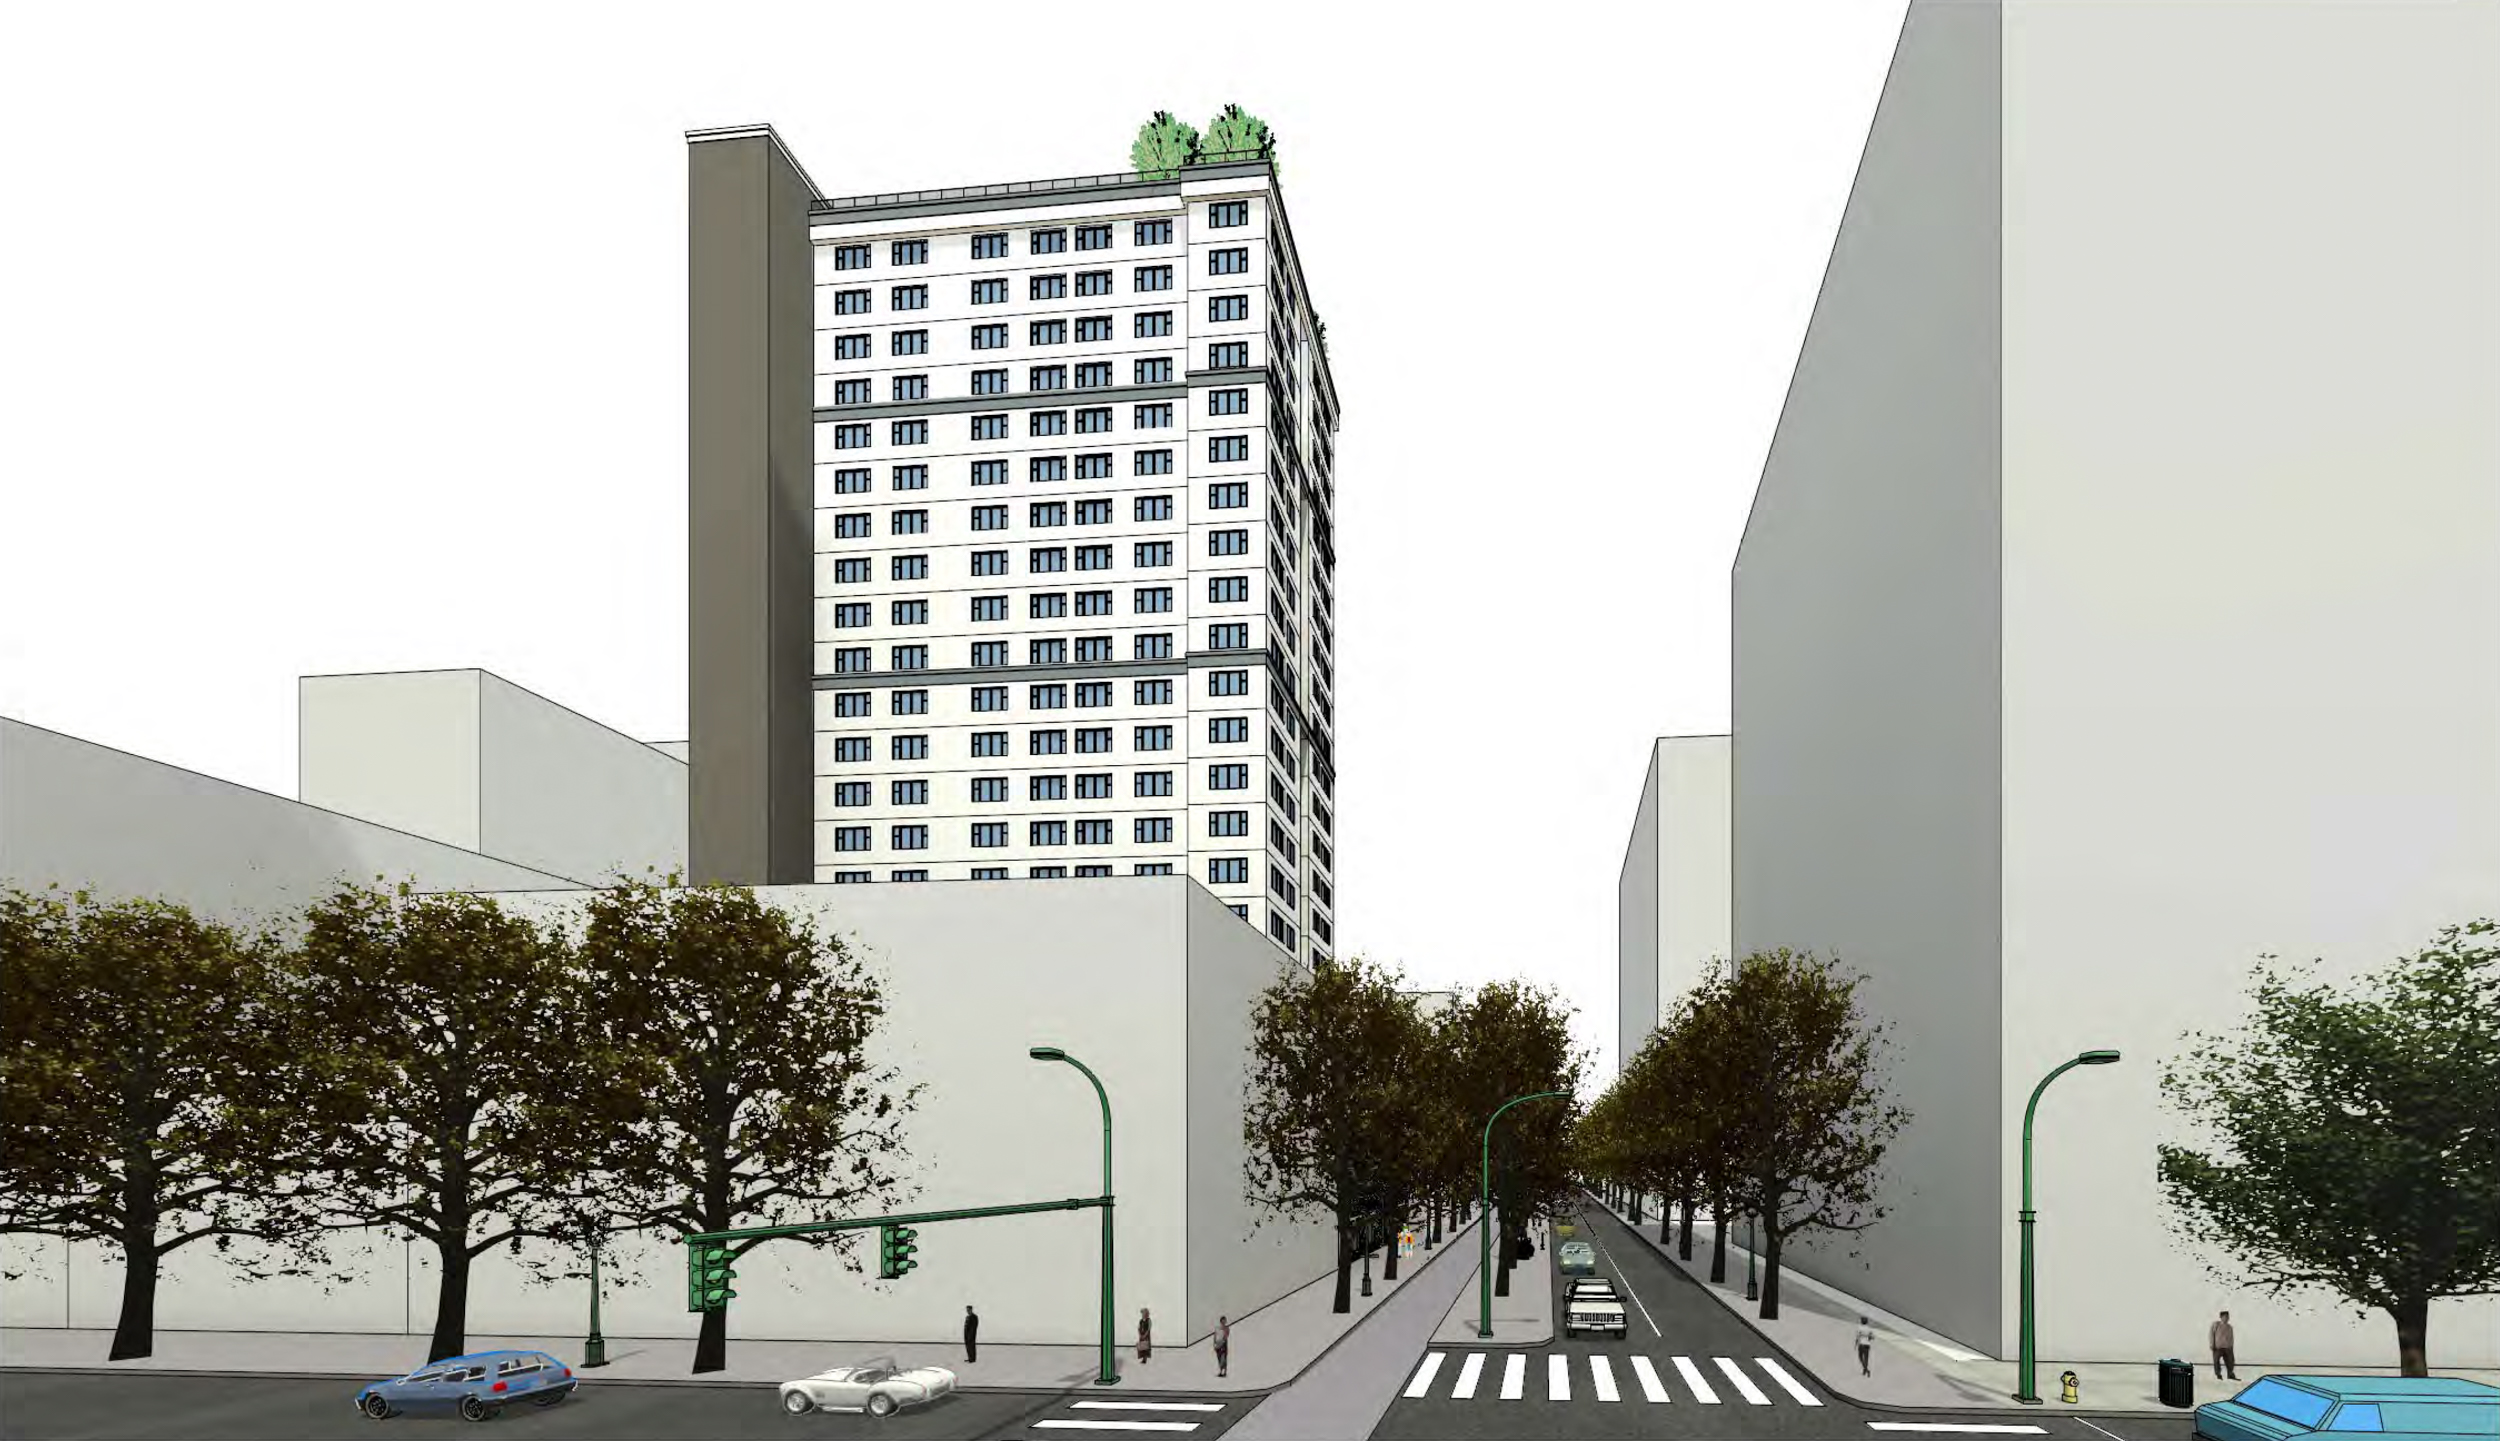 19 North 2nd Street pedestrian view, illustration by Anderson Architects